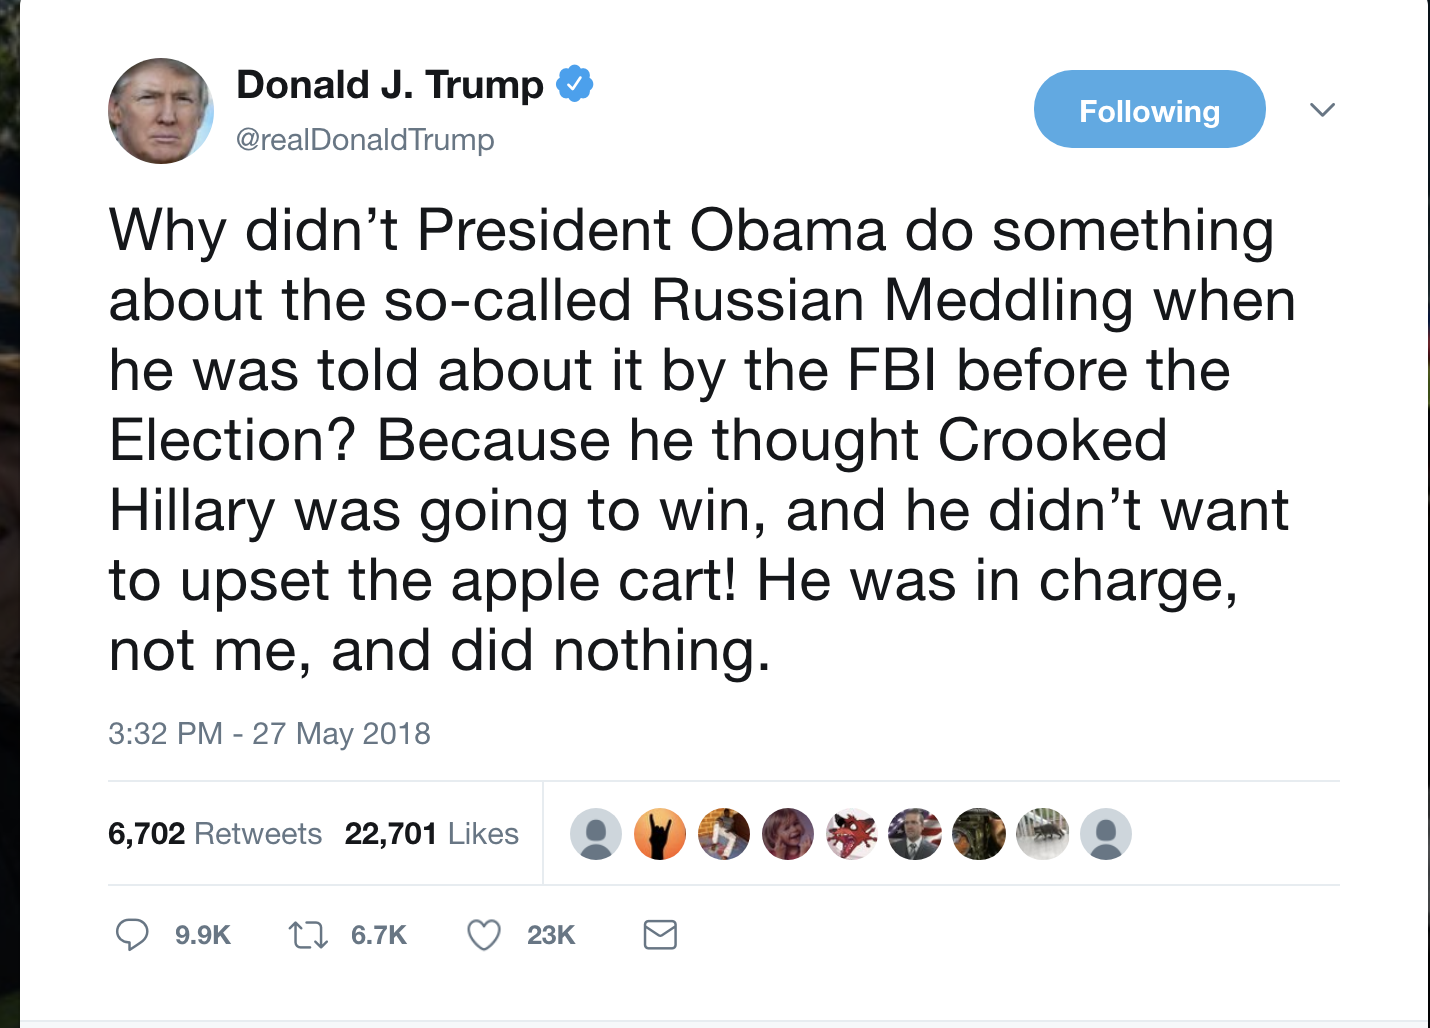 Screen-Shot-2018-05-27-at-4.10.26-PM Trump Goes Bonkers & Tweets Insane Sunday Evening Attack On Obama Like A Nut-Job Corruption Crime Donald Trump Election 2016 Politics Russia Top Stories 